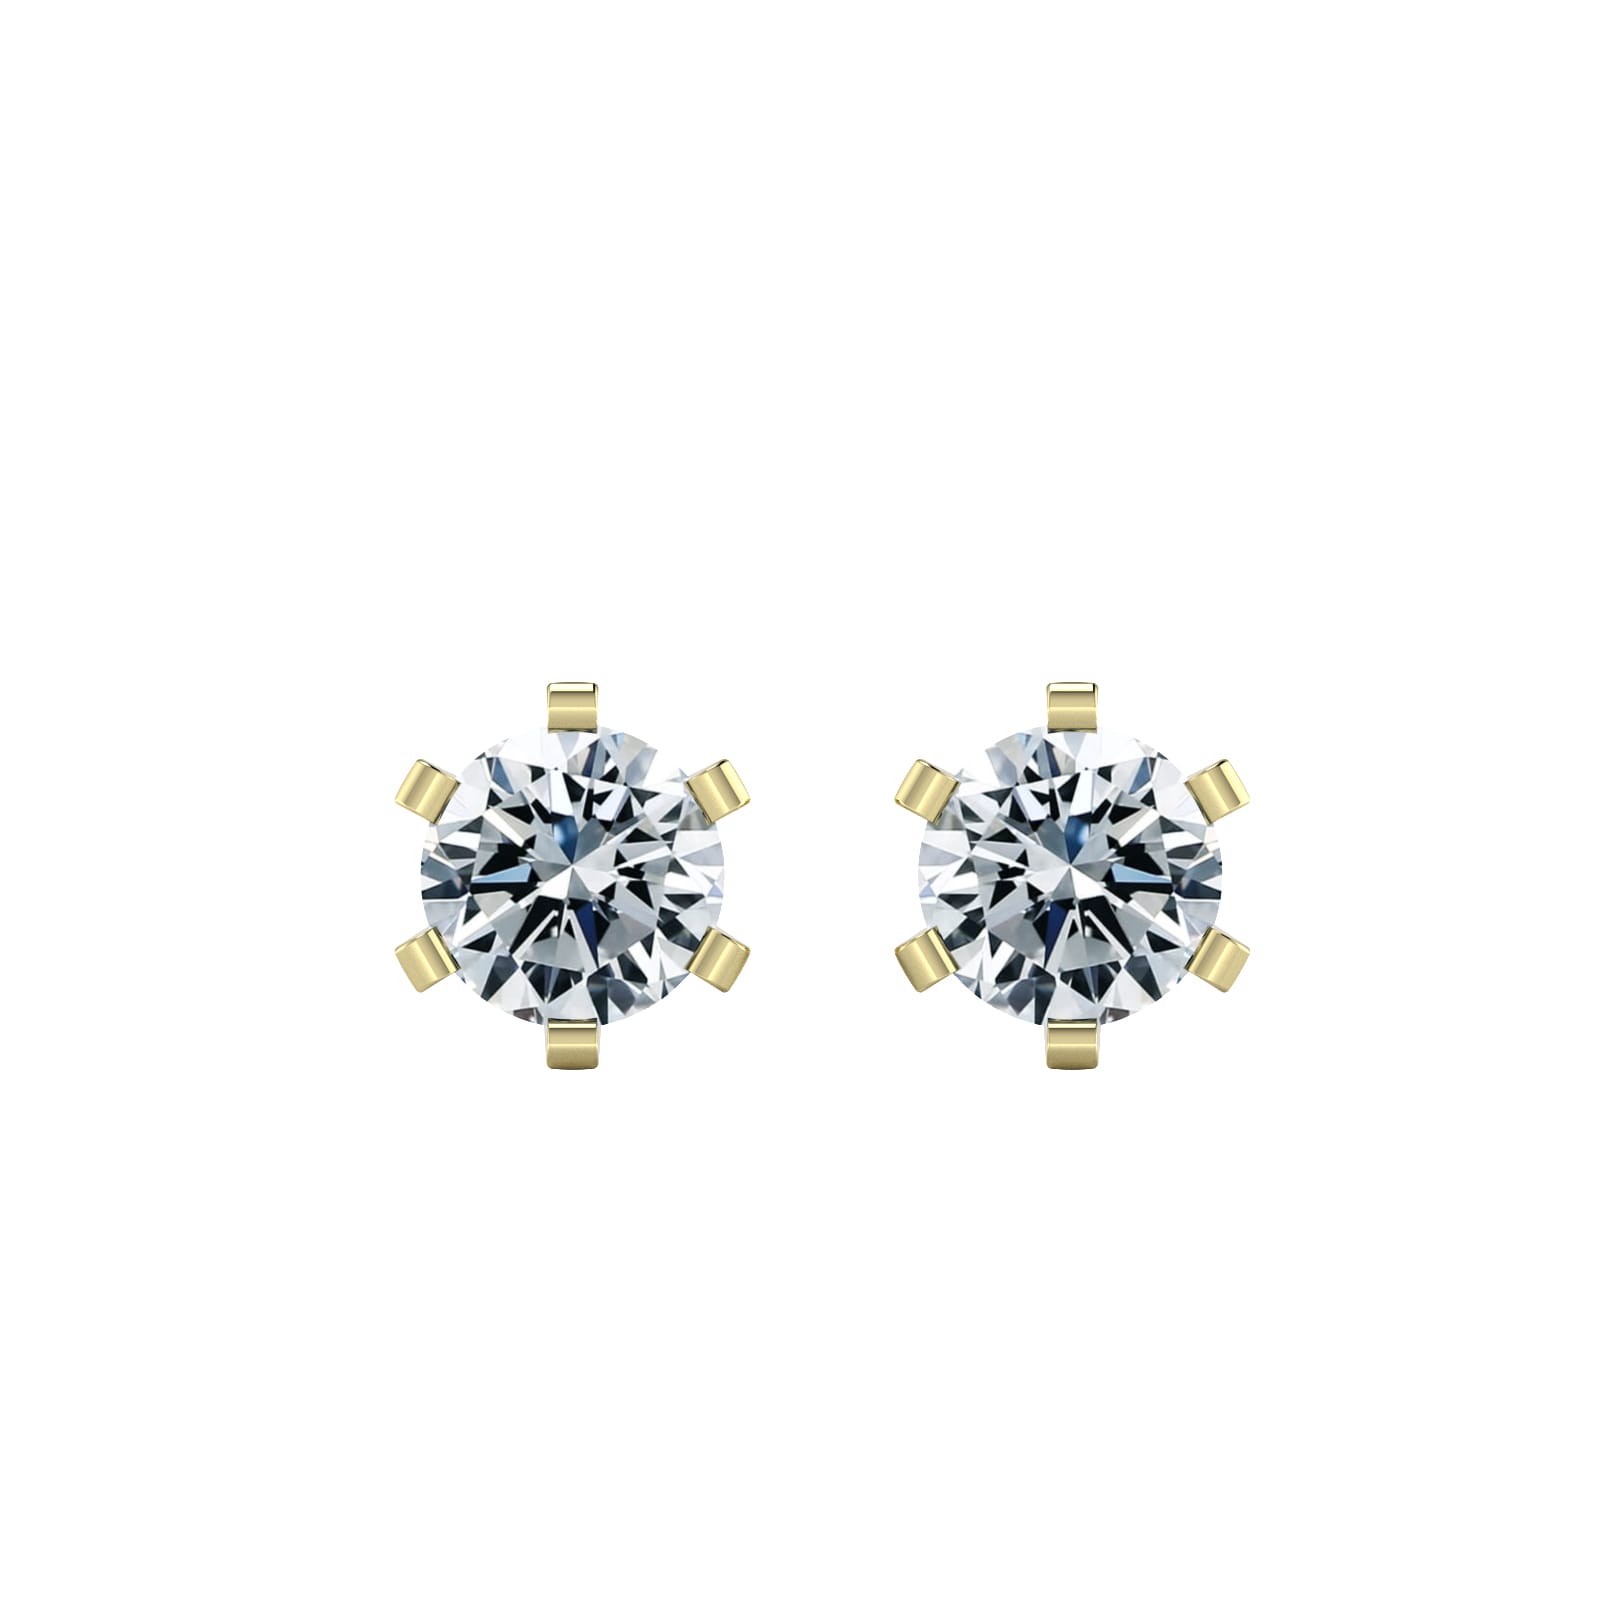 9ct Yellow Gold 1.00cttw Solitaire Diamond Stud Earrings